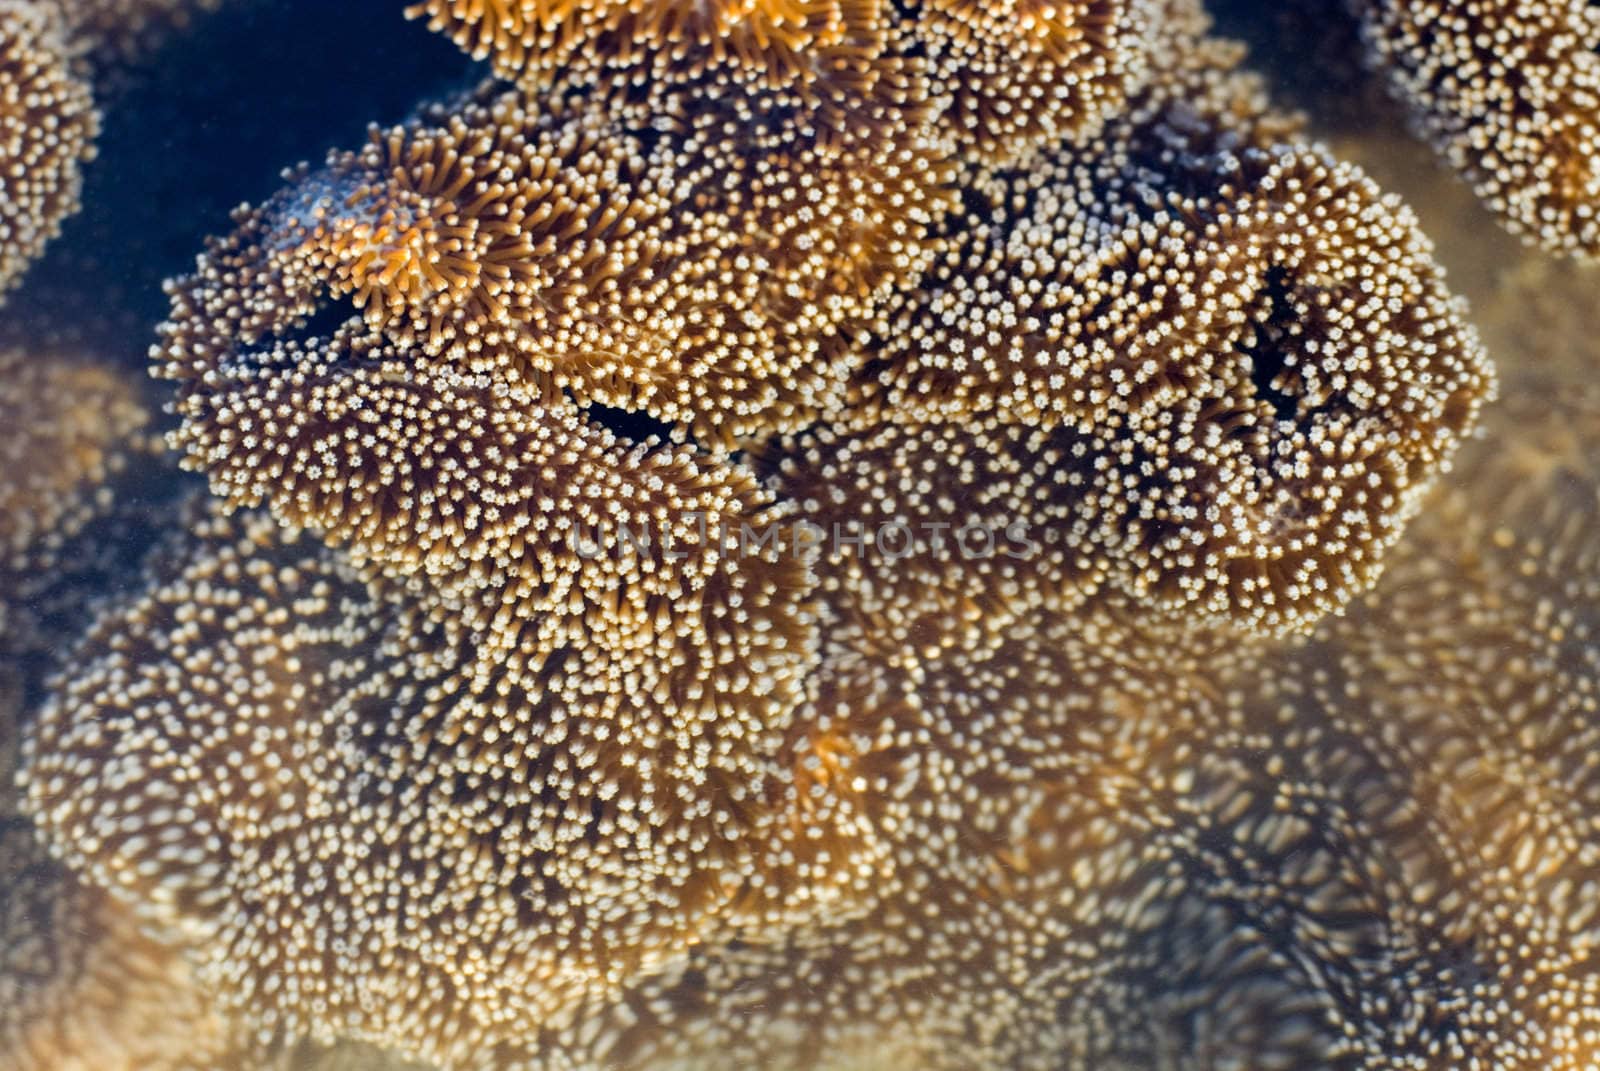 A leather or 'toadstool' coral, Sarcophyton sp with polyps extended